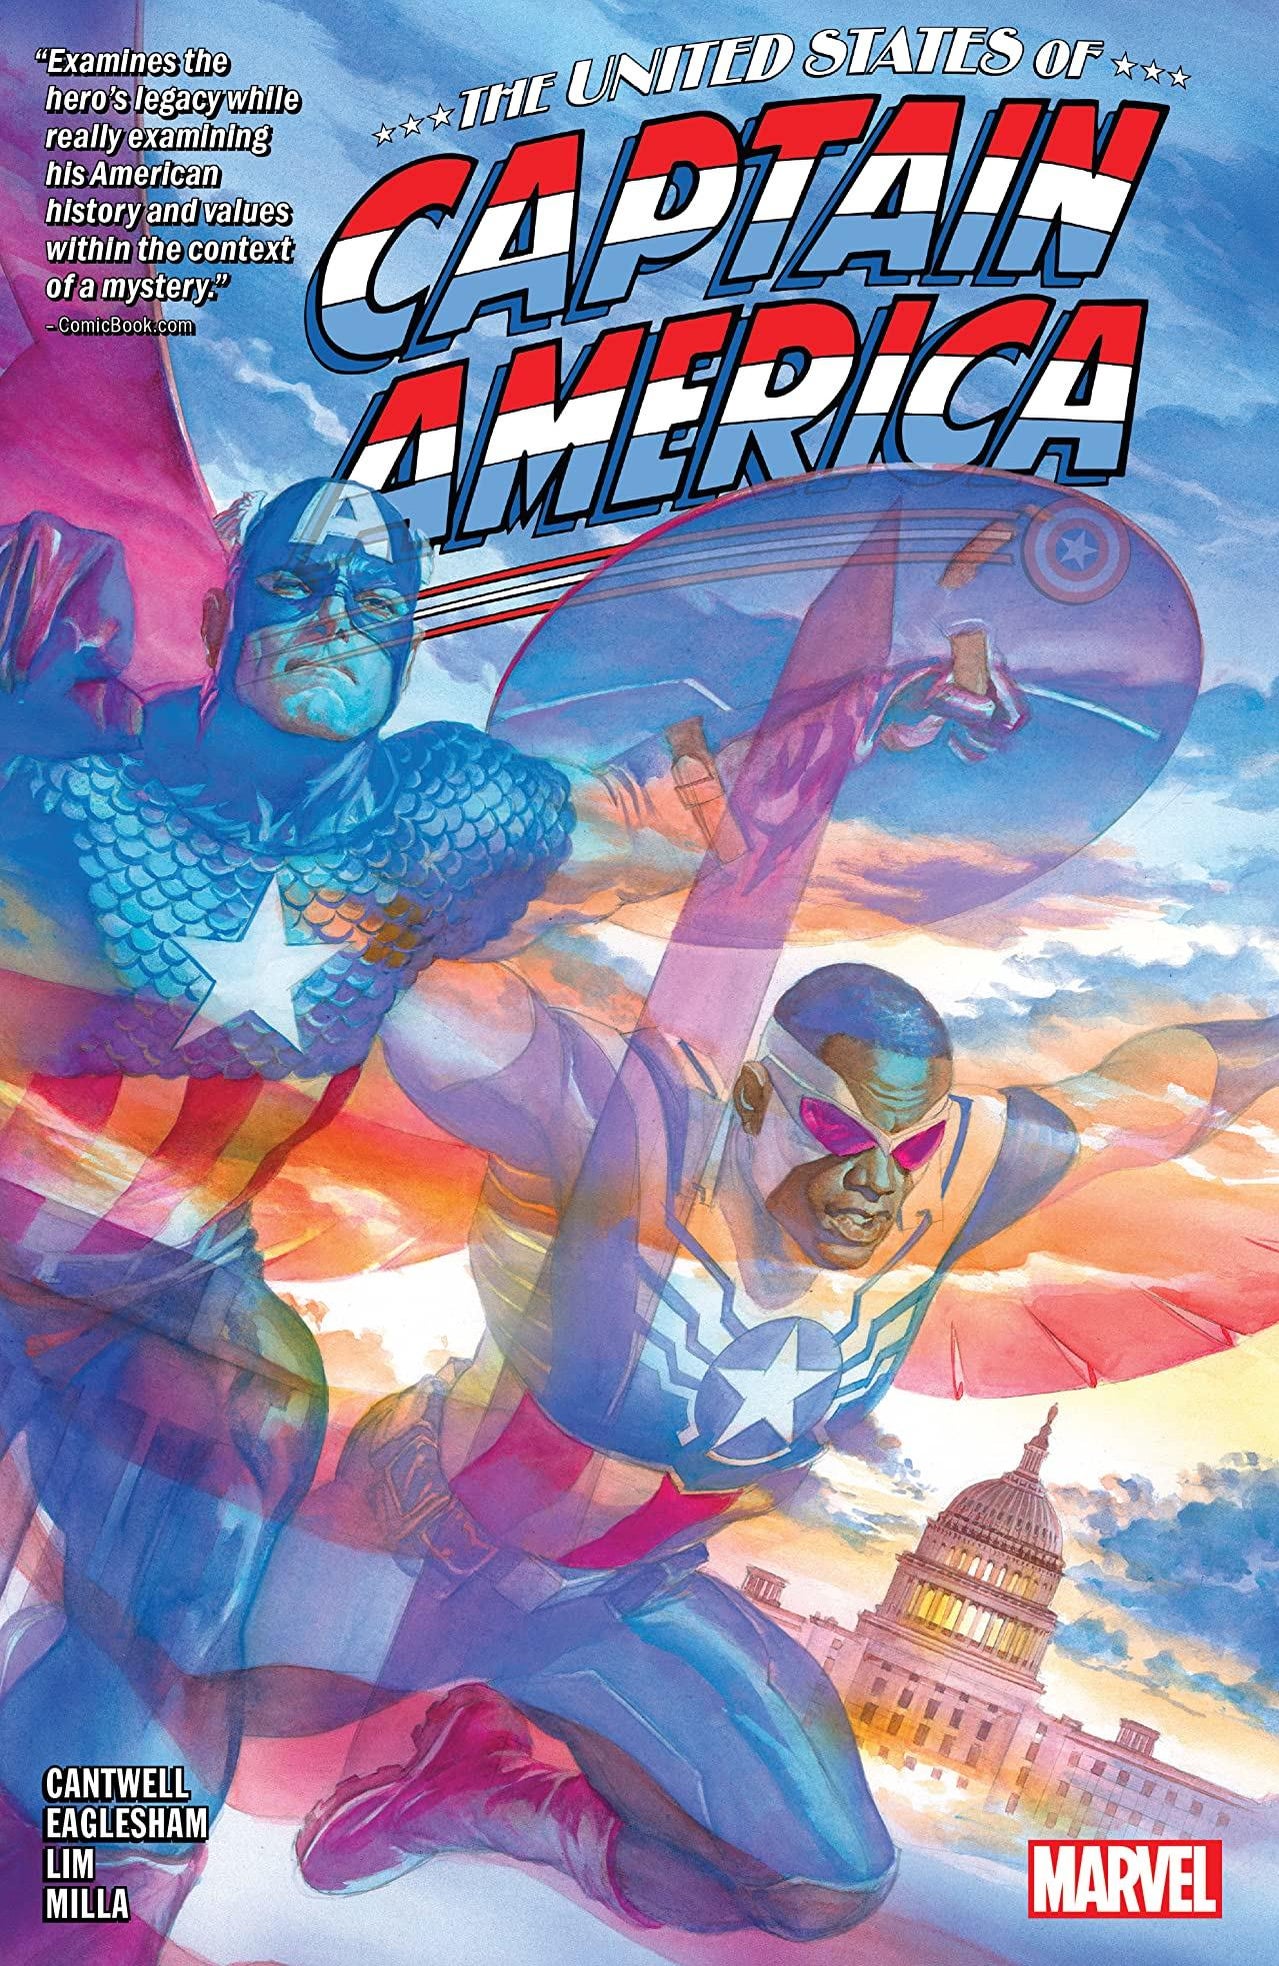 the-united-states-of-captain-america.jpg